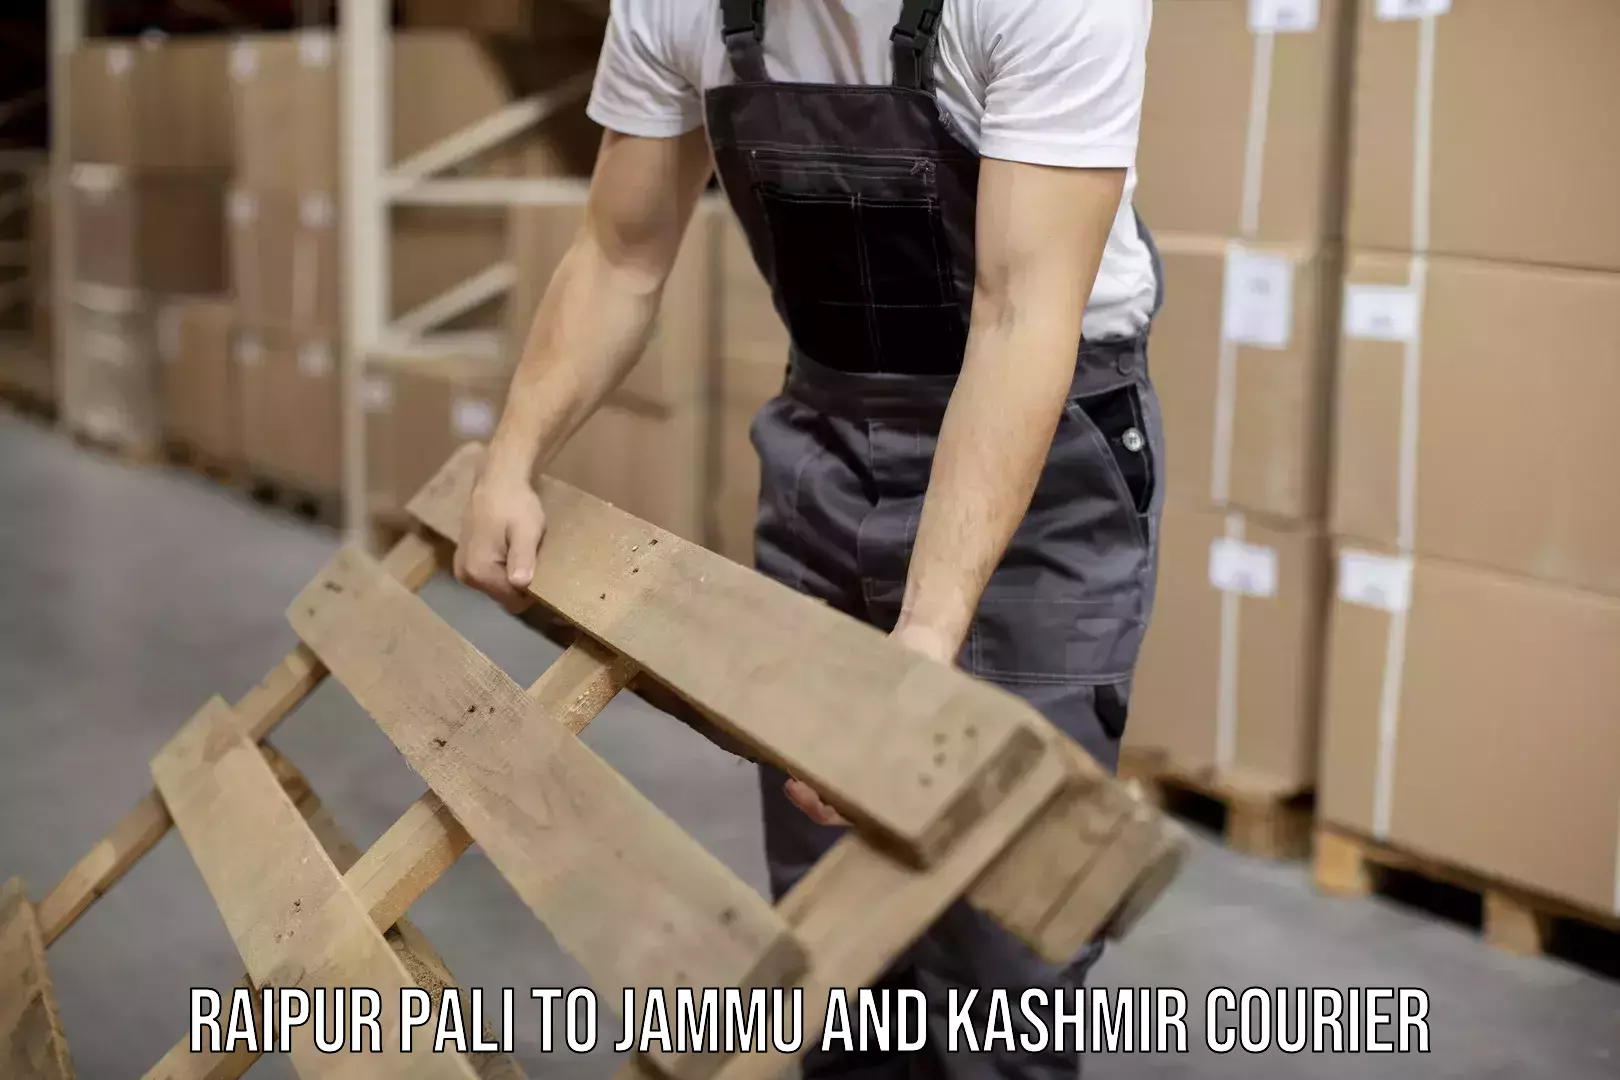 Large package courier Raipur Pali to IIT Jammu